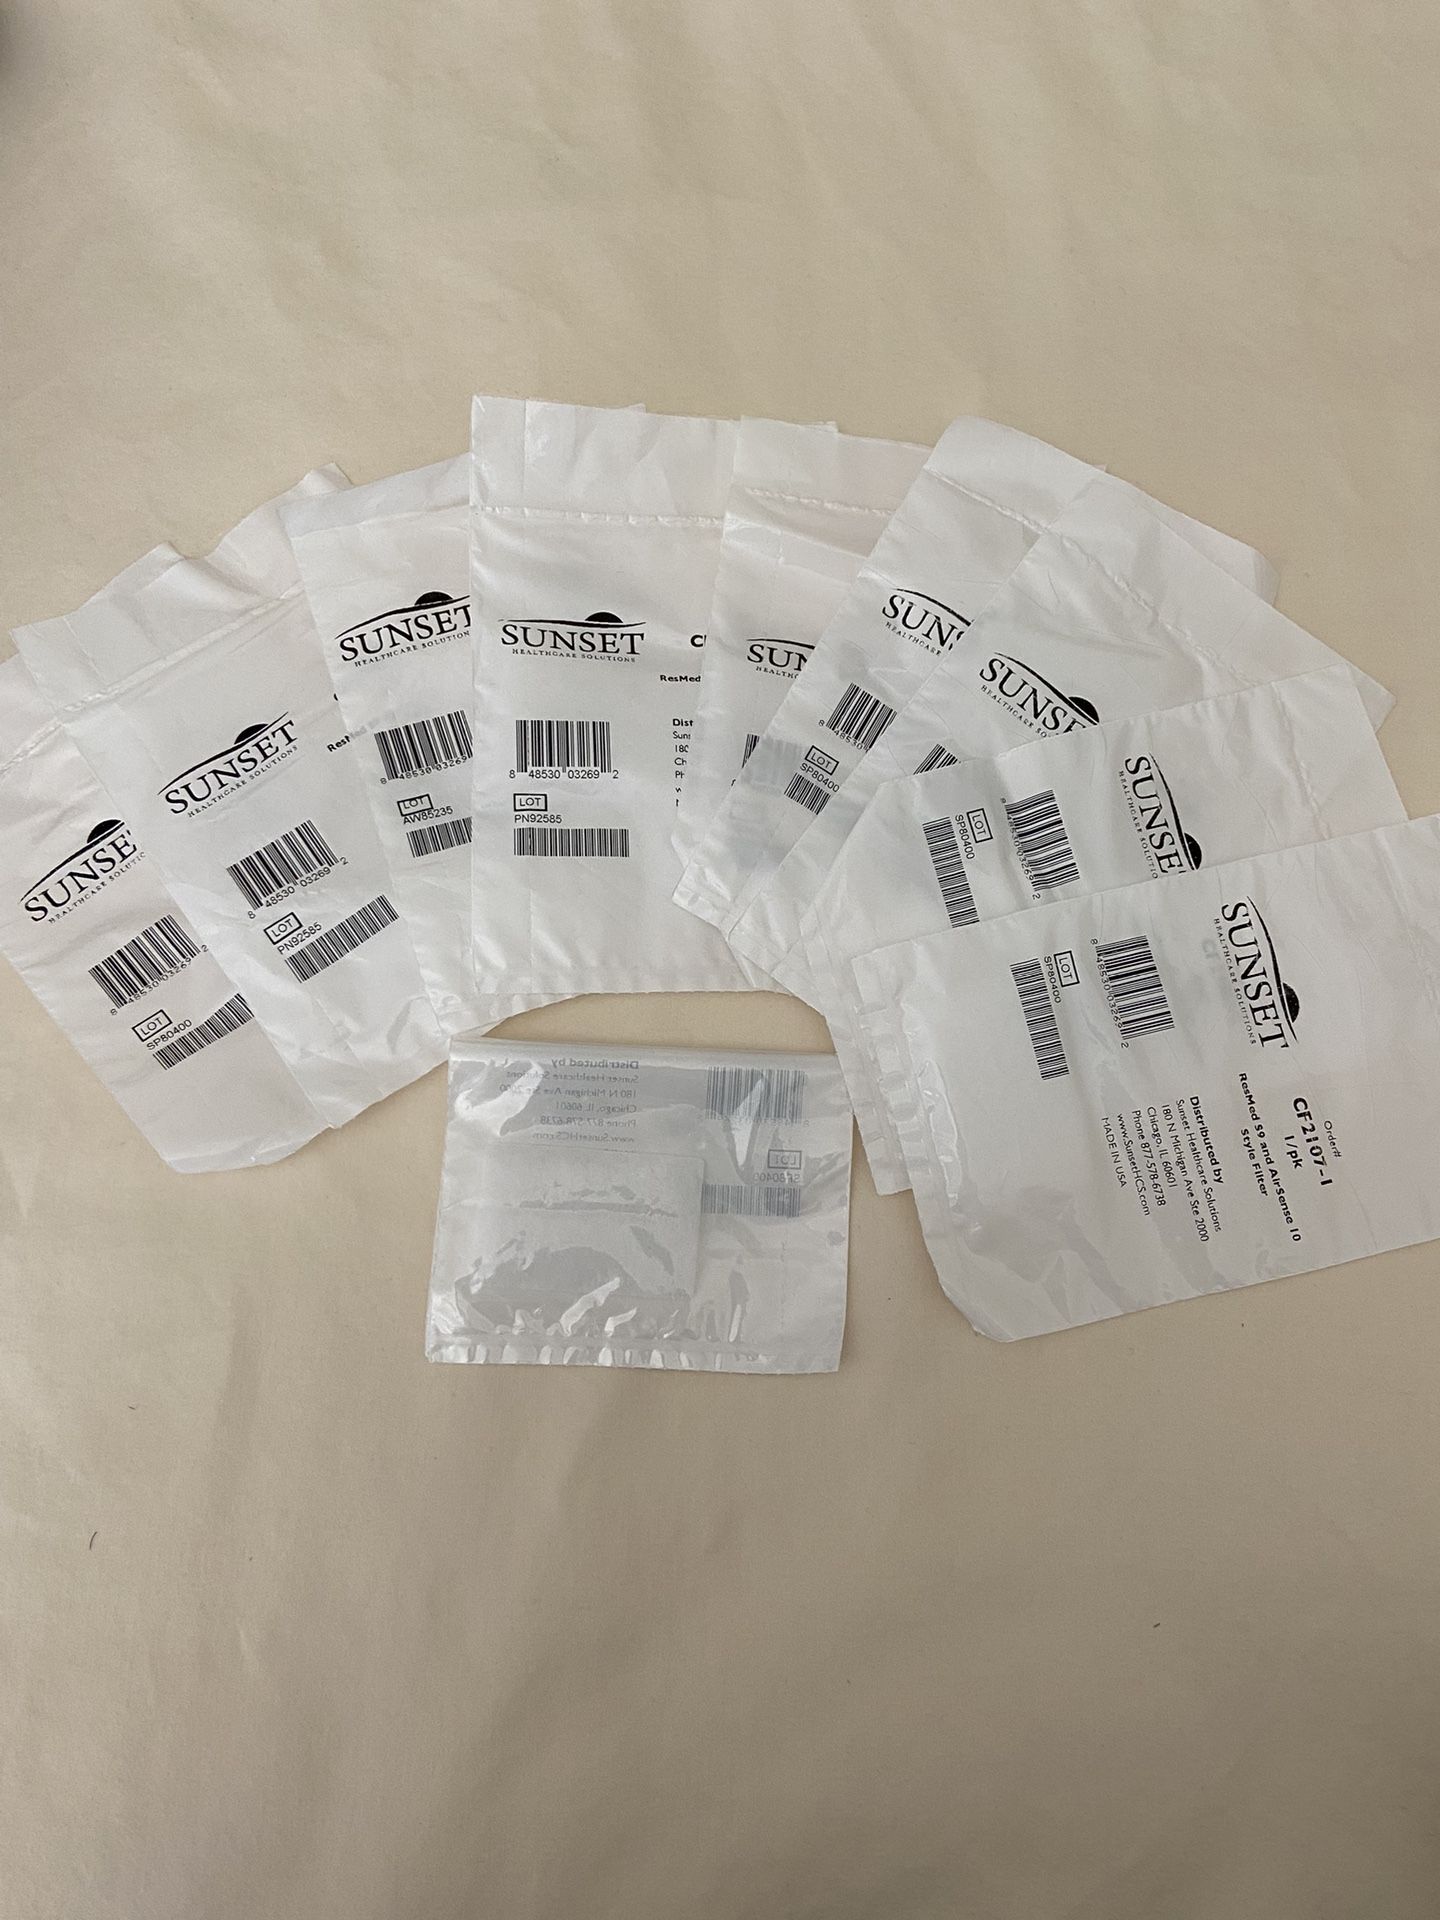 CPAP Machine ResMed filters For S9 & 10